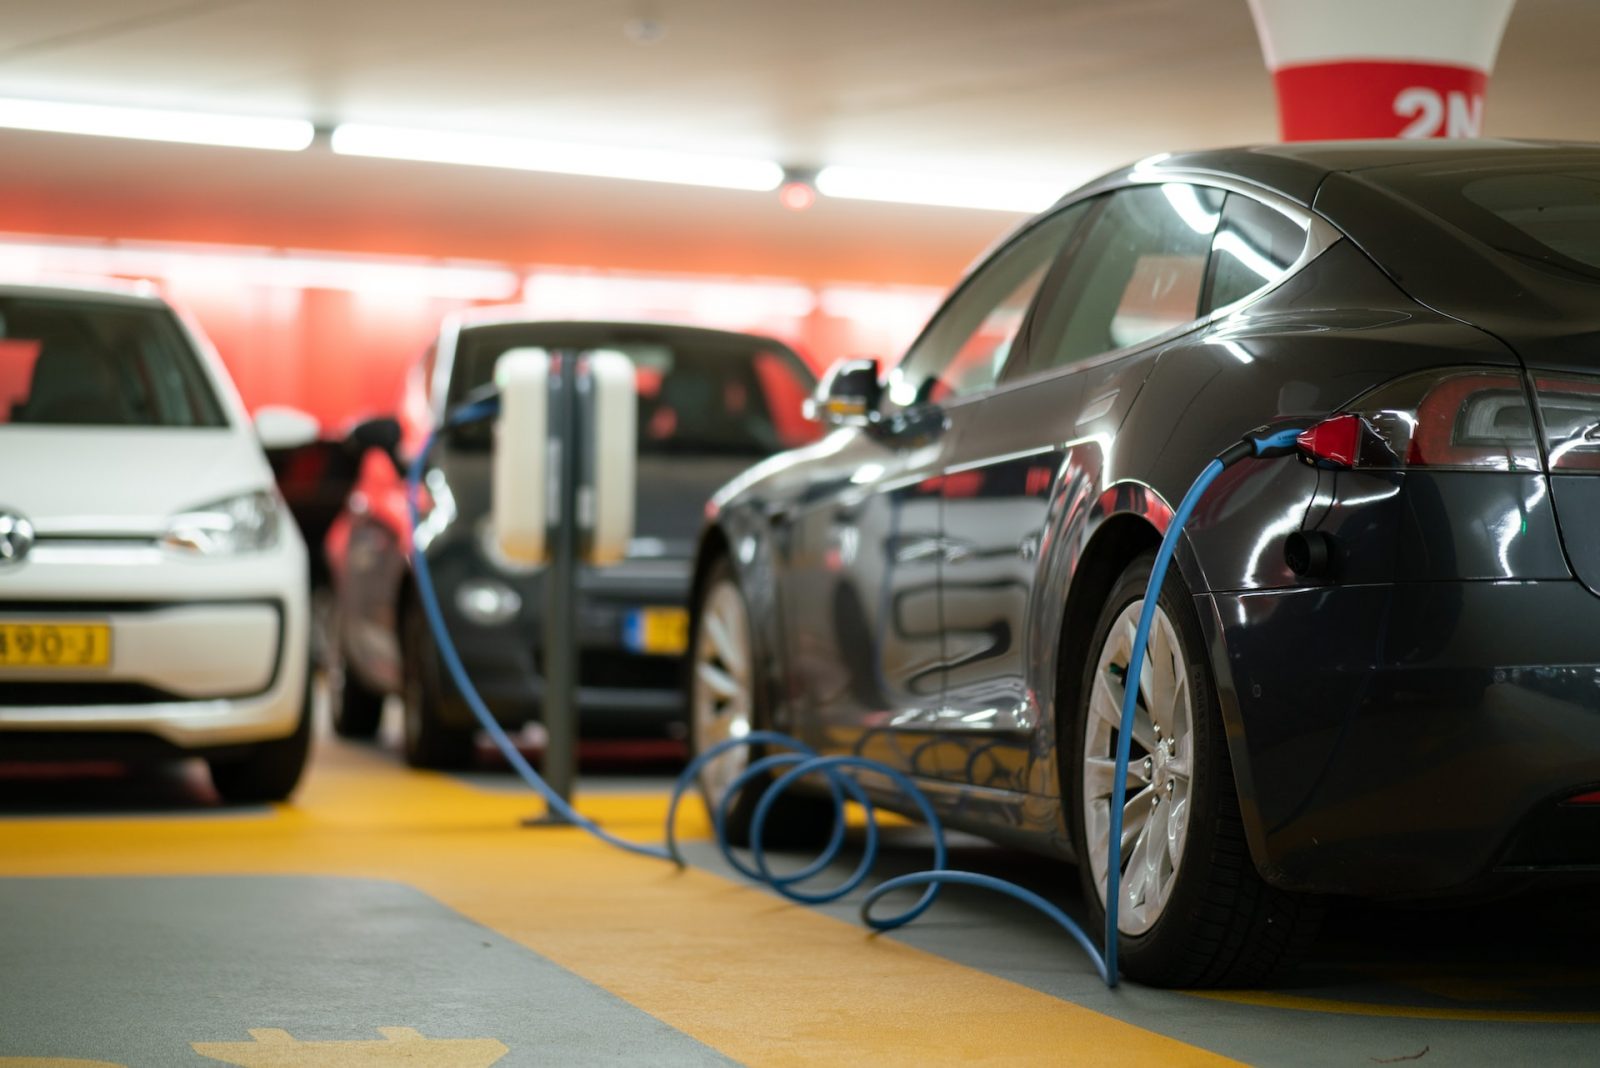 Abu Dhabi to host its first electric vehicle assembly facility